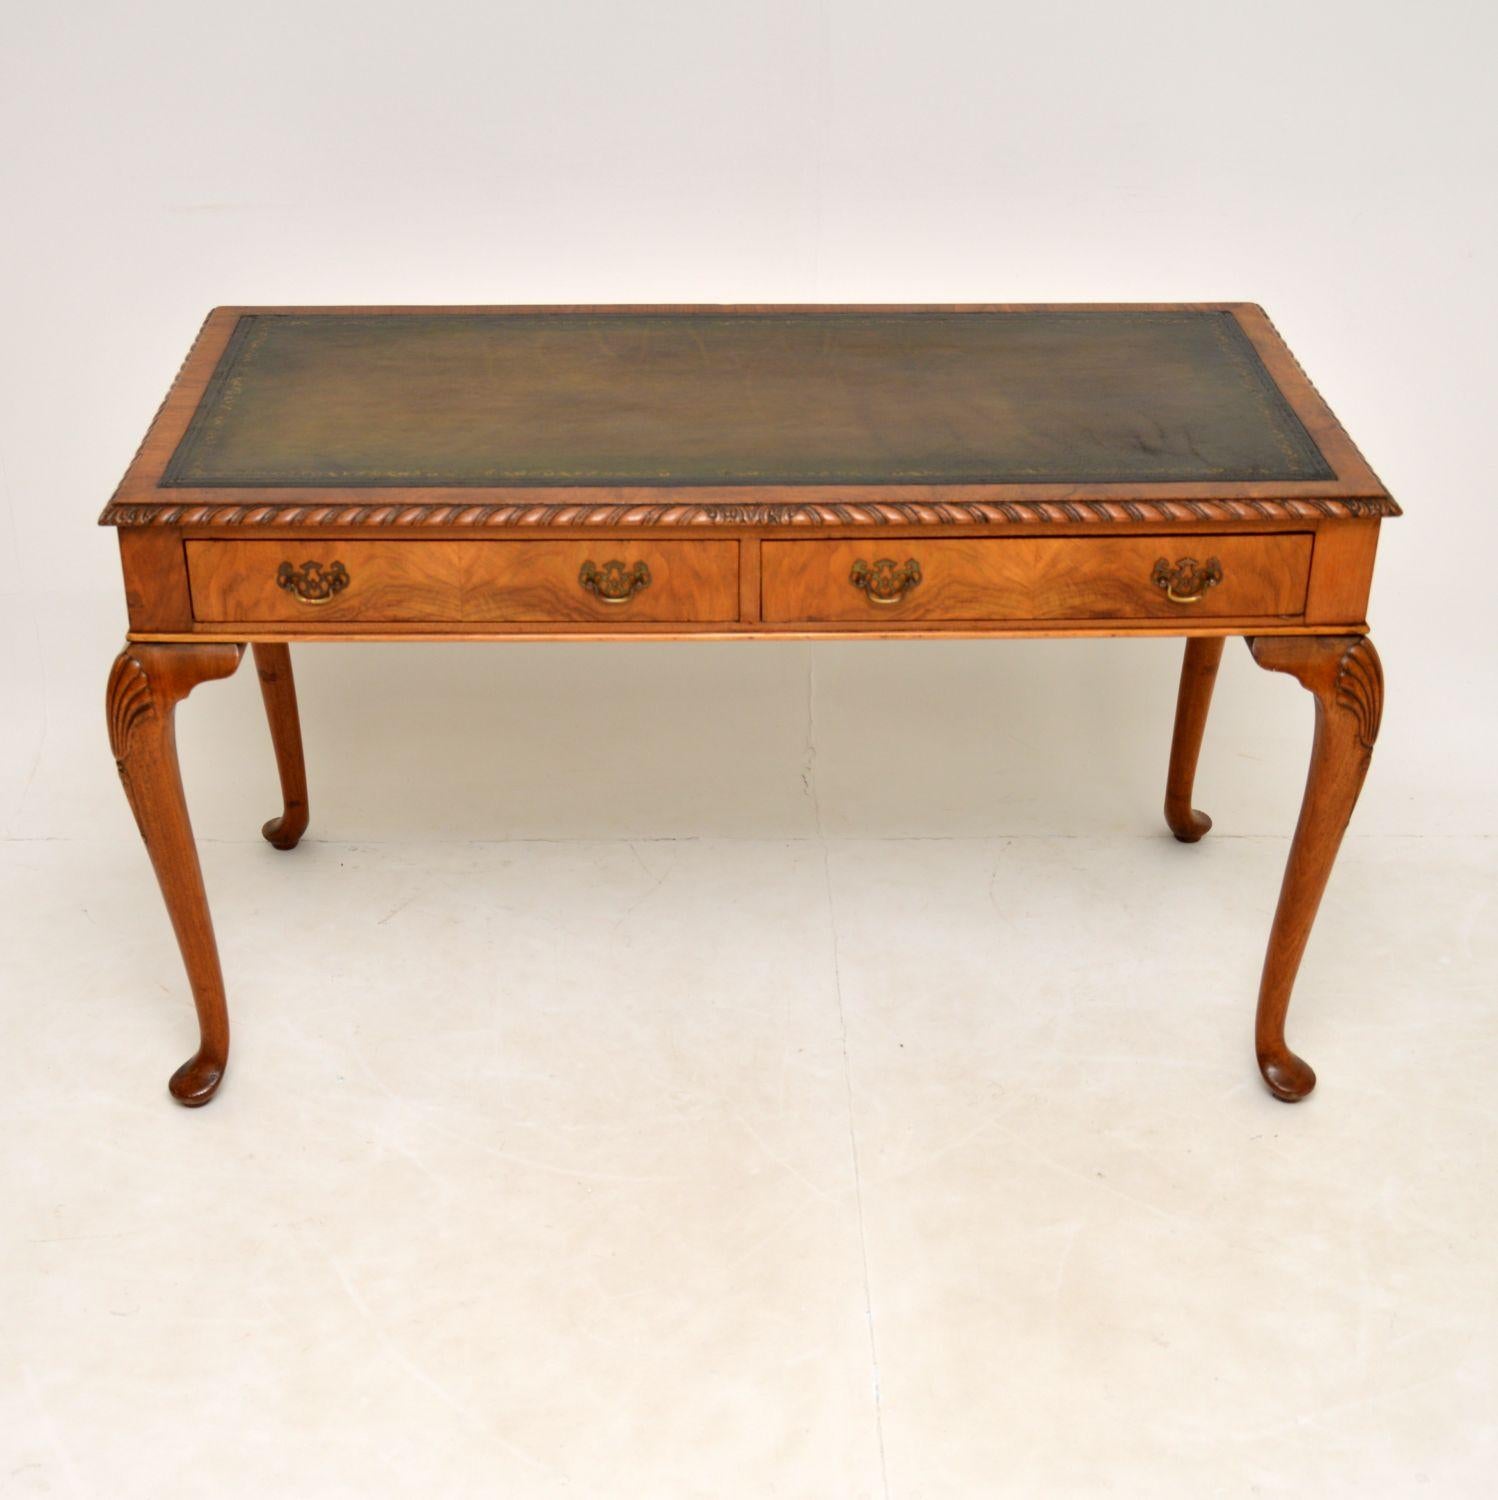 A beautiful and useful antique writing table / desk in walnut. This was made in England, it dates from the 1900-1920 period.

This is extremely well made, its sits on cabriole legs with shell carved knees, and has a gadrooned top edge. The back is